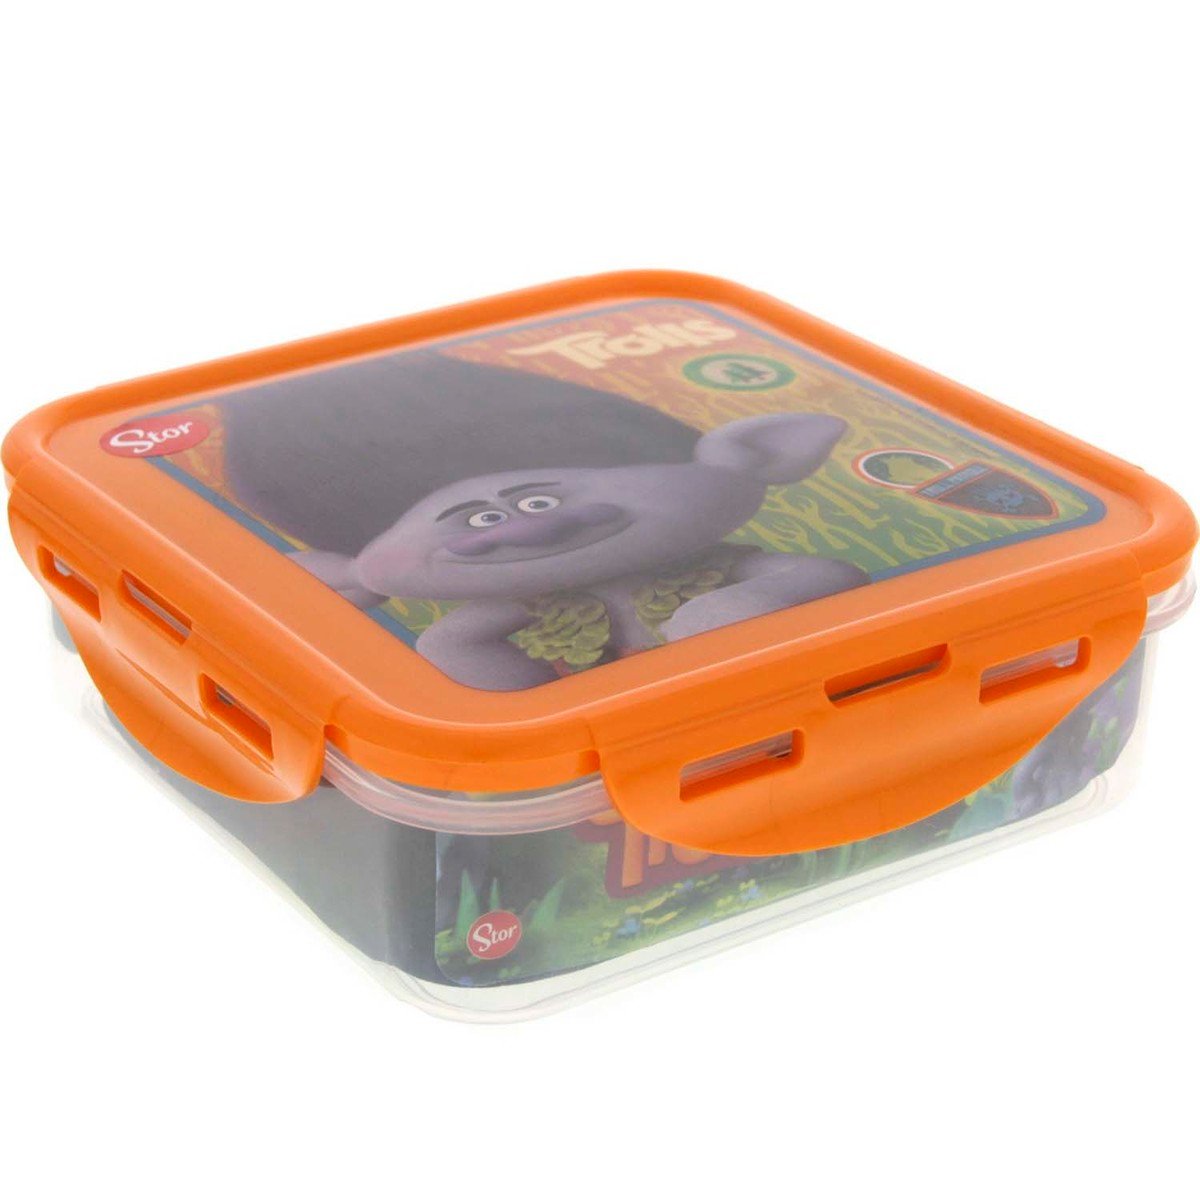 Trolls Hermetic Food Container Square 84164 750ml